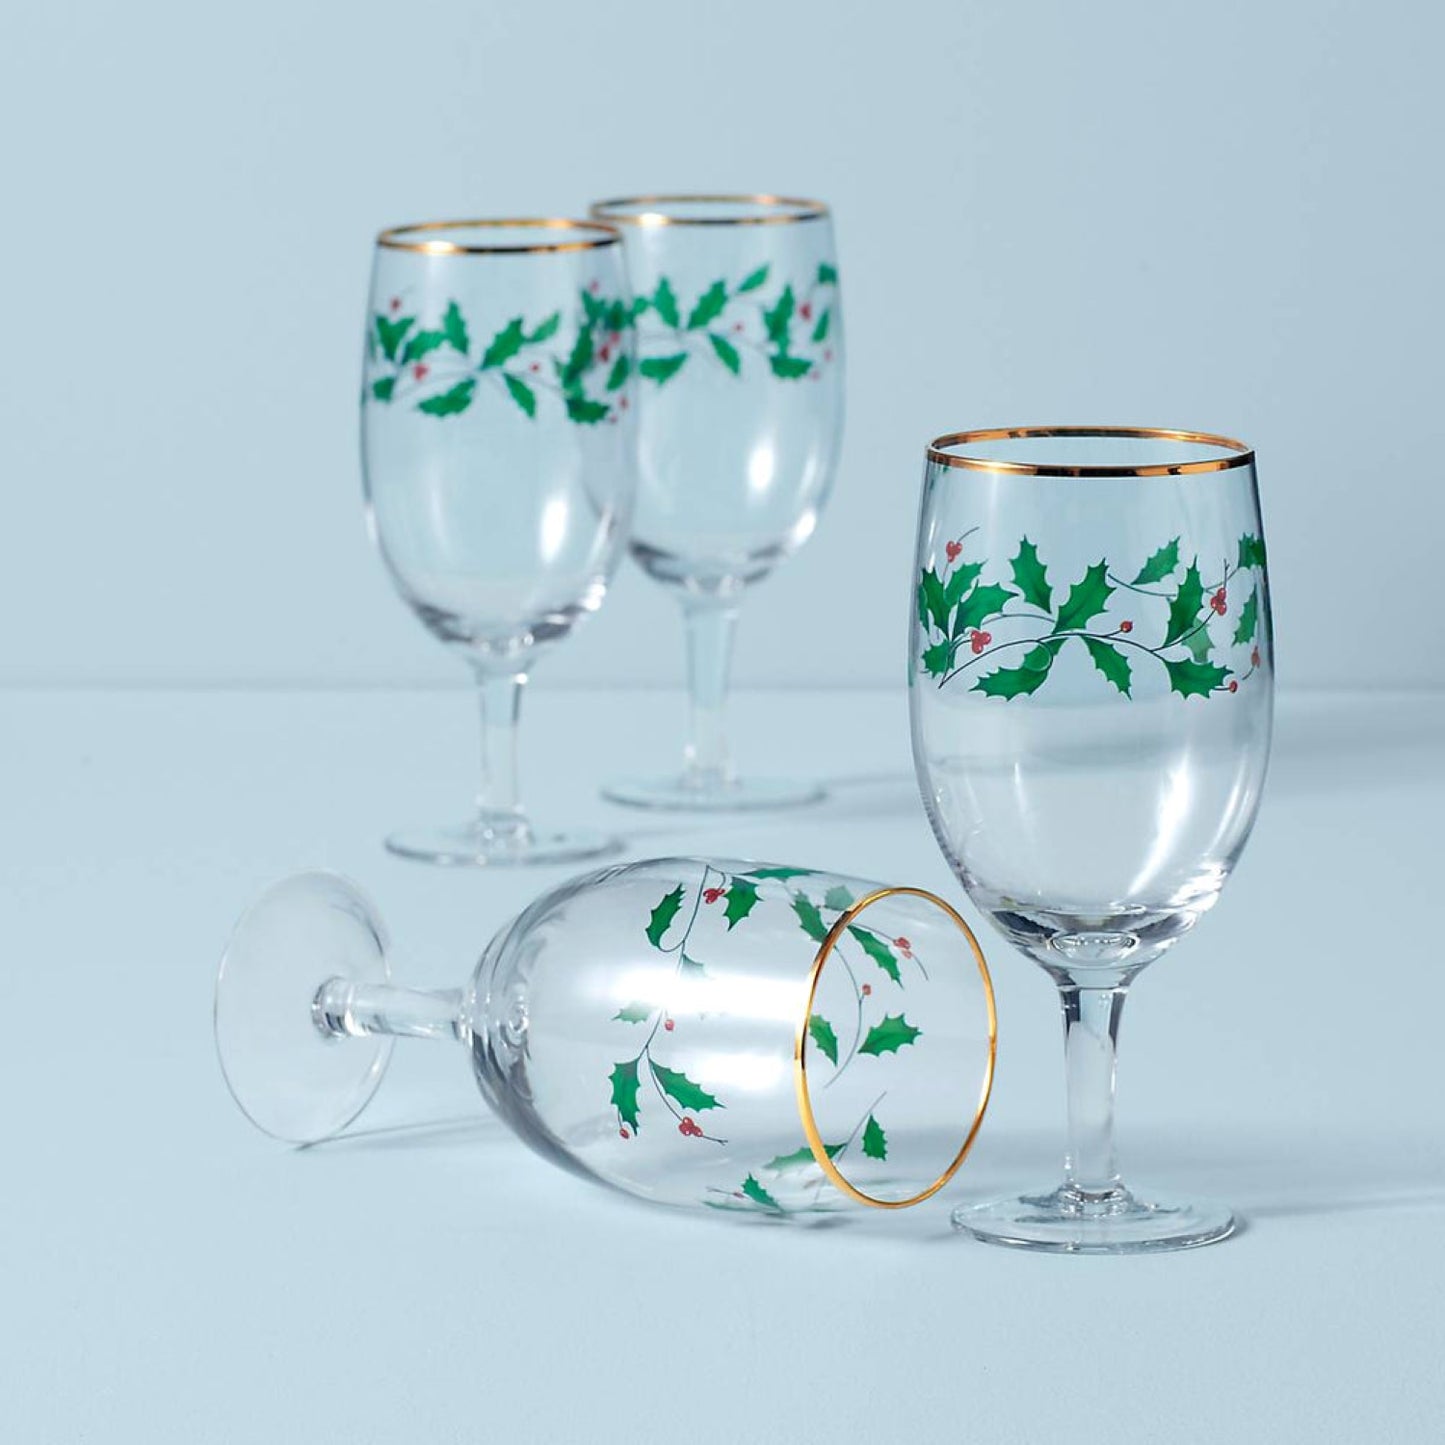 Lenox Holiday Decal Iced Beverage Glass, Set of 4.